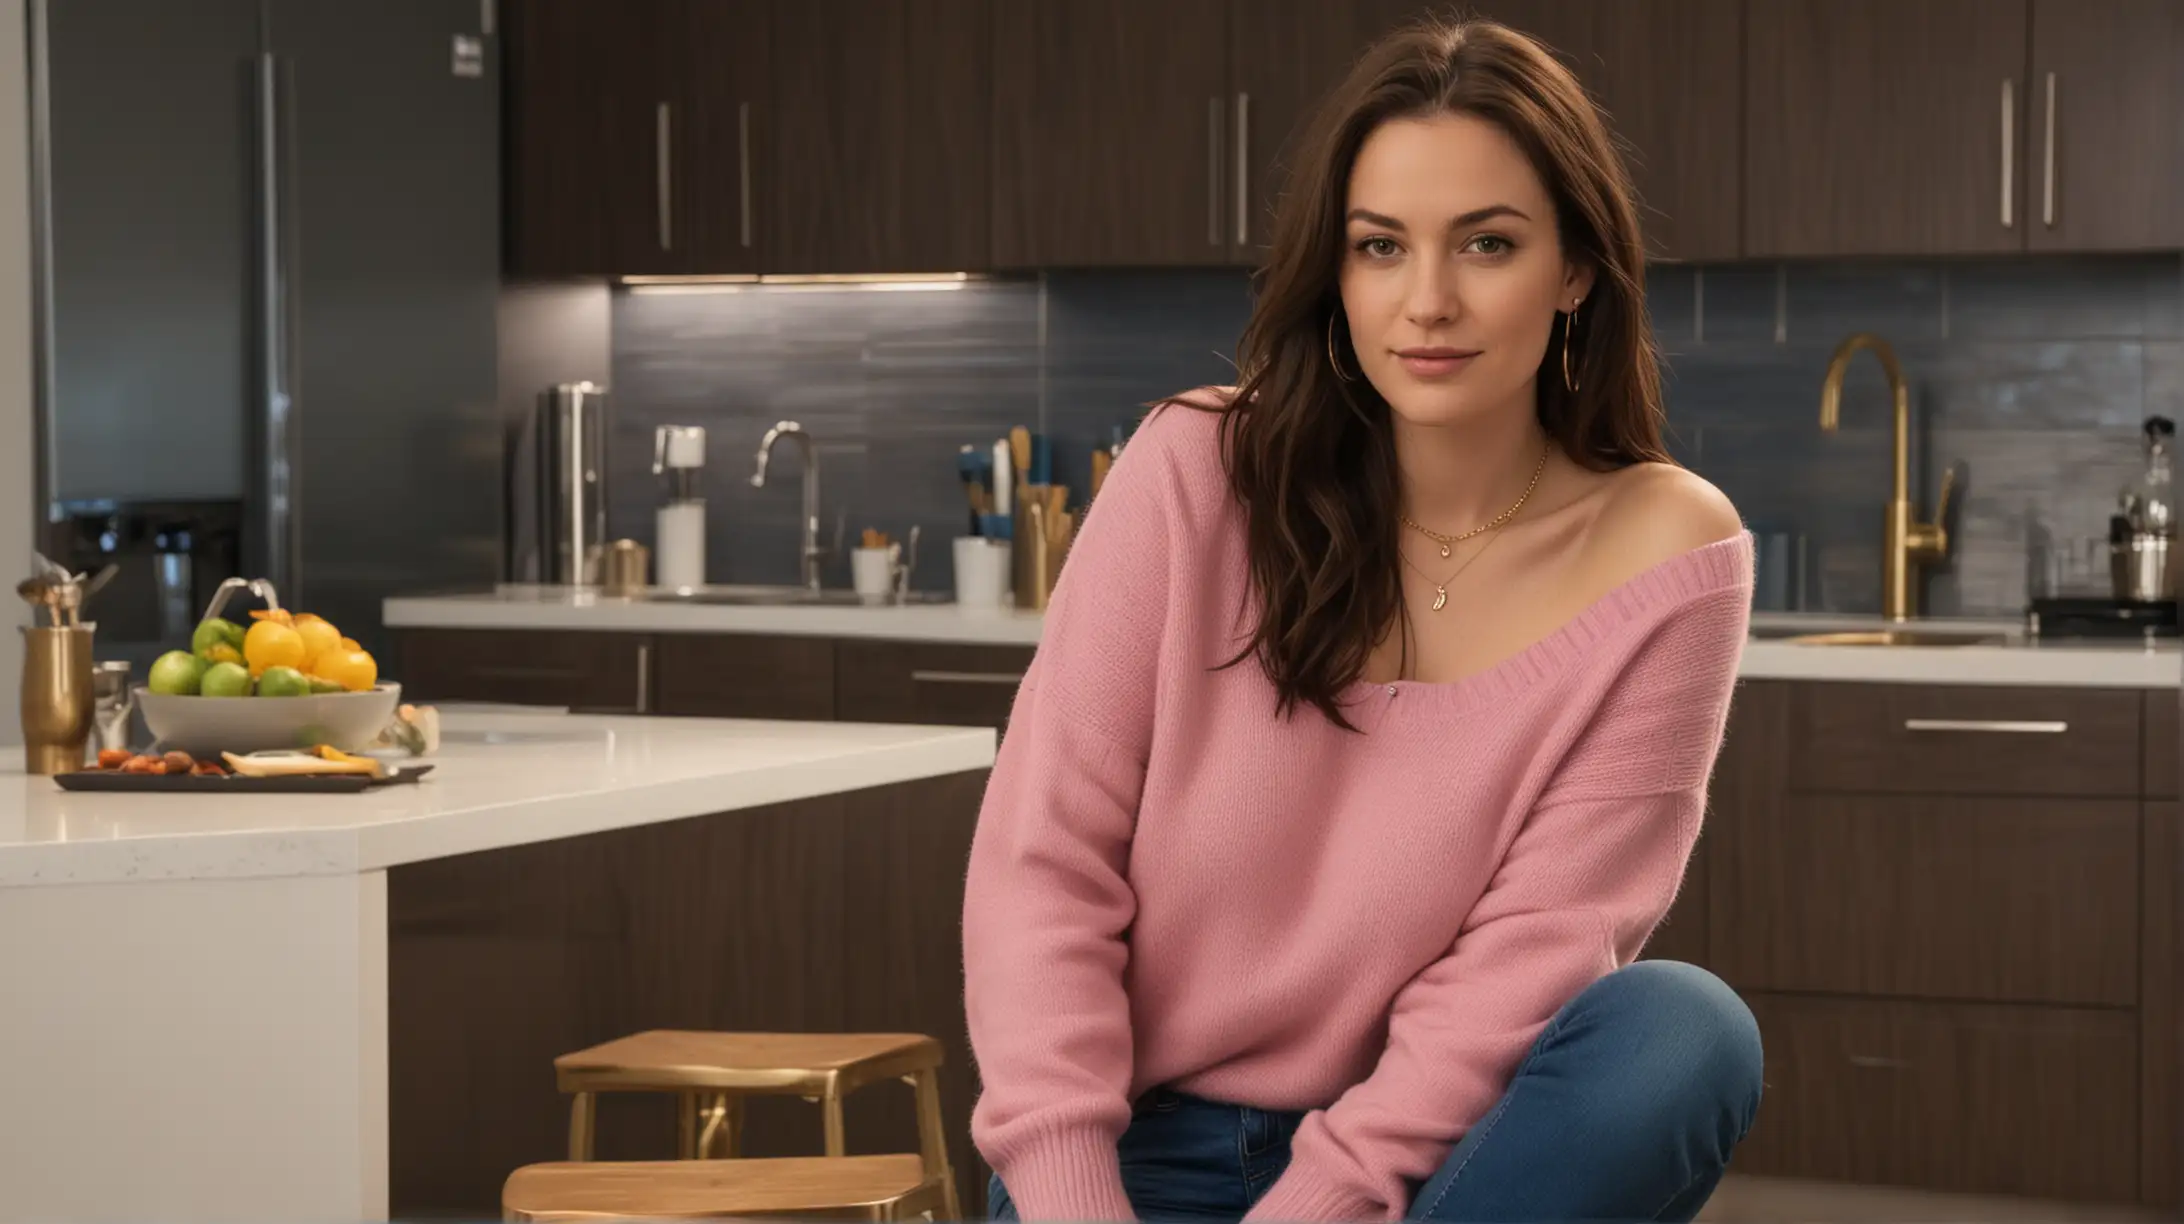 In a modern kitchen at night, 30 year old pale white woman with long dark brown hair parted to the right sitting on a kitchen chair, wearing a pink sweater, blue jeans, and gold necklace.  Urban high rise background.